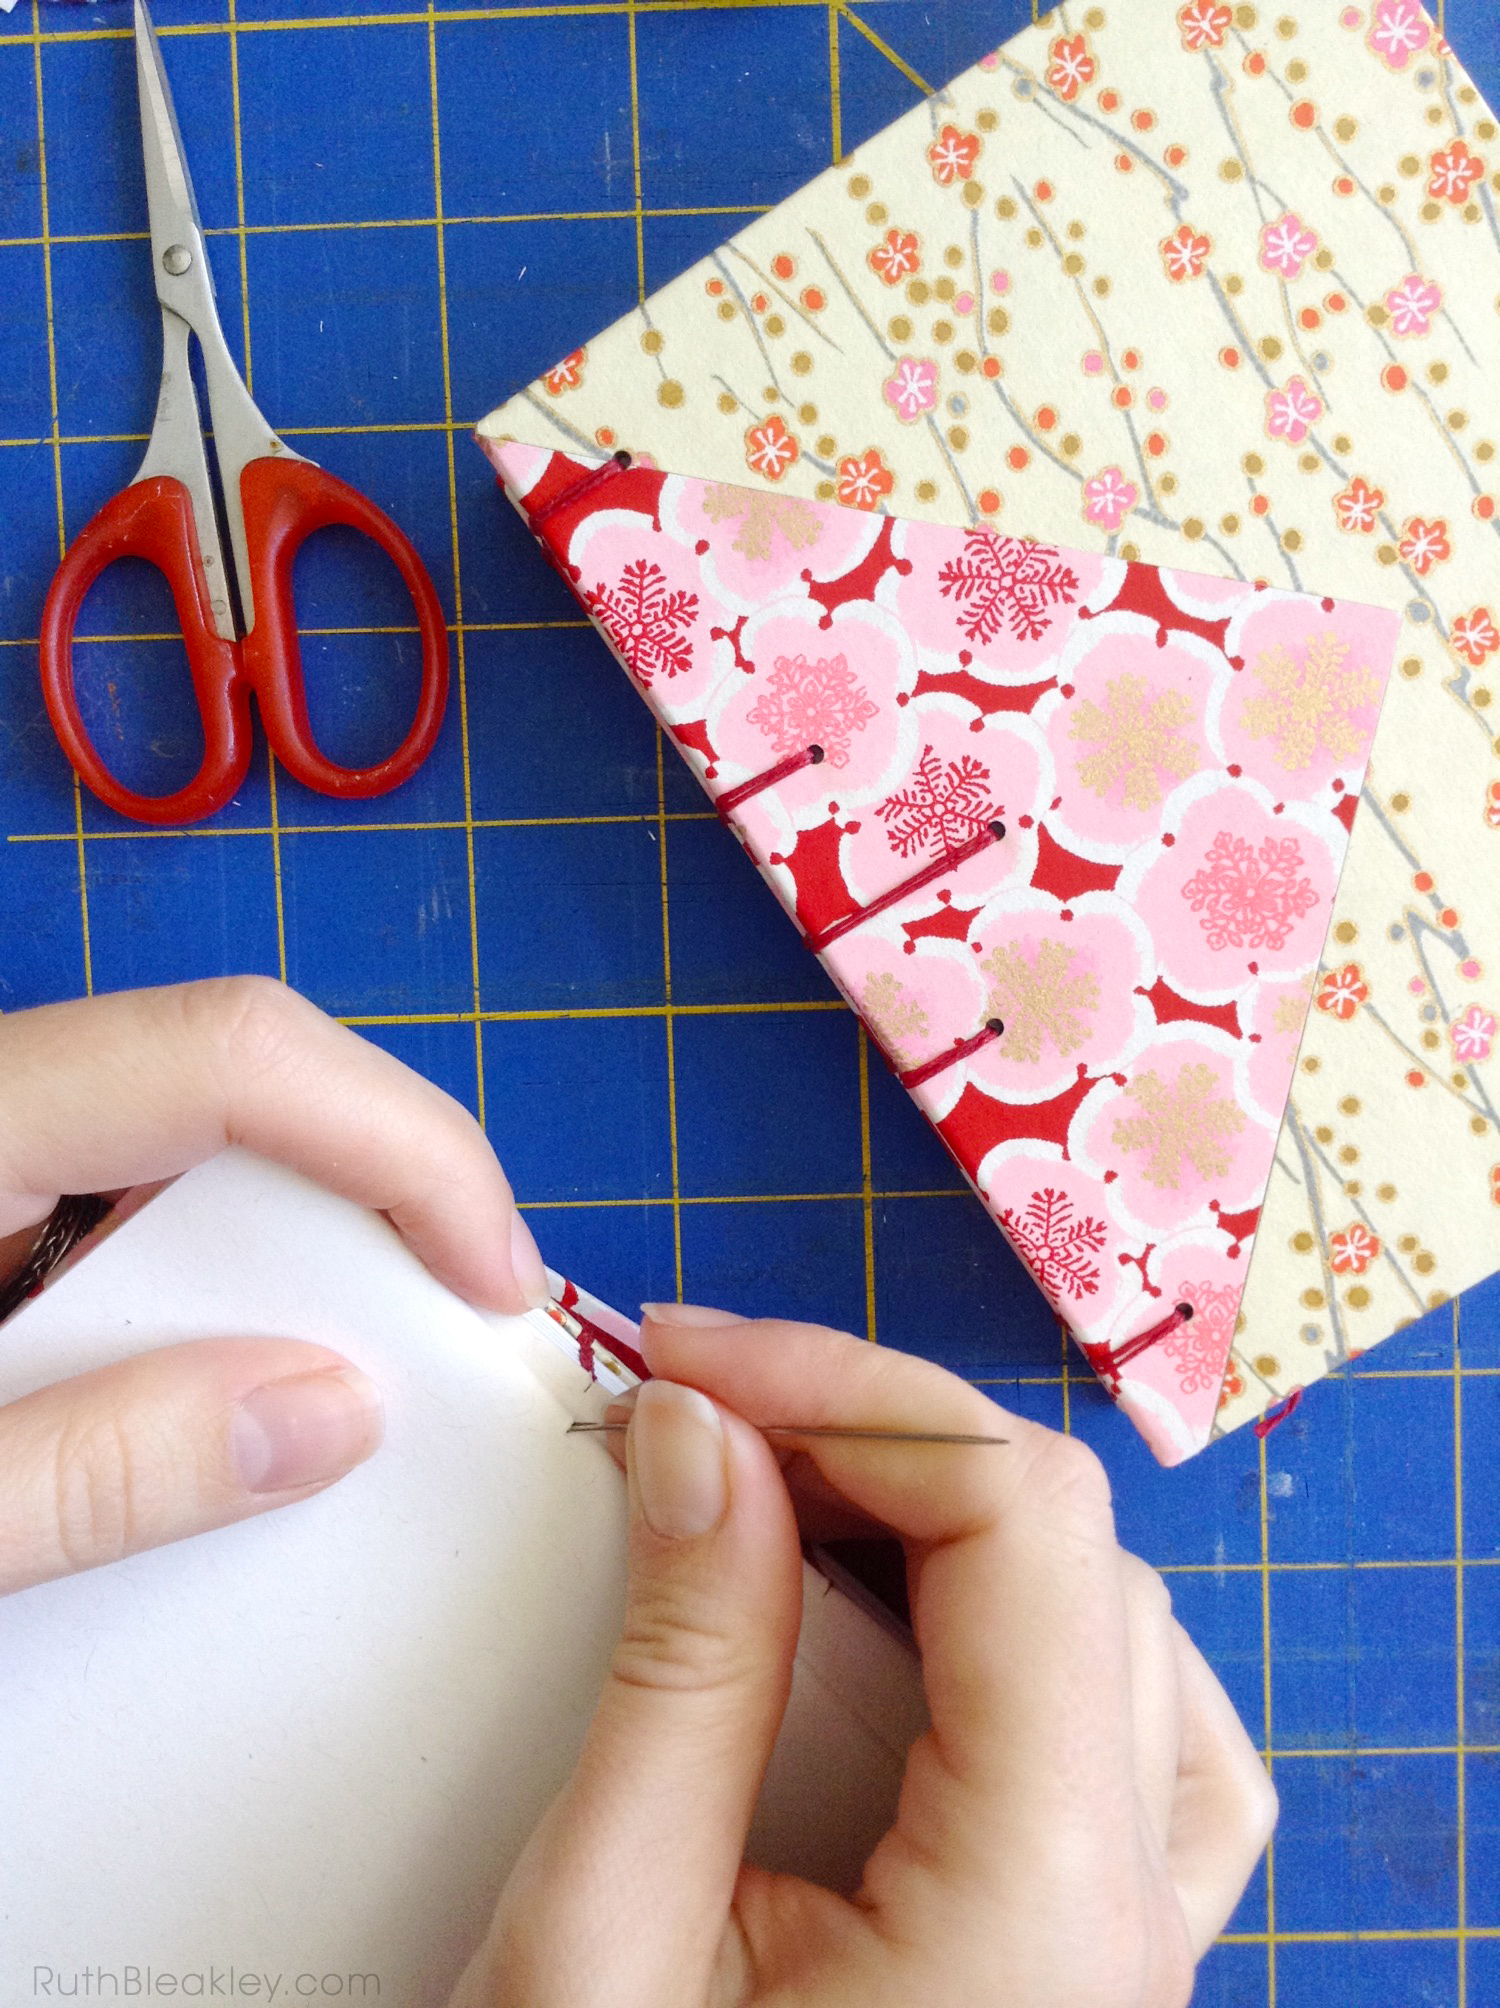 Cherry Blossom Twin Journal handmade by bookbinder Ruth Bleakley from Chiyogami